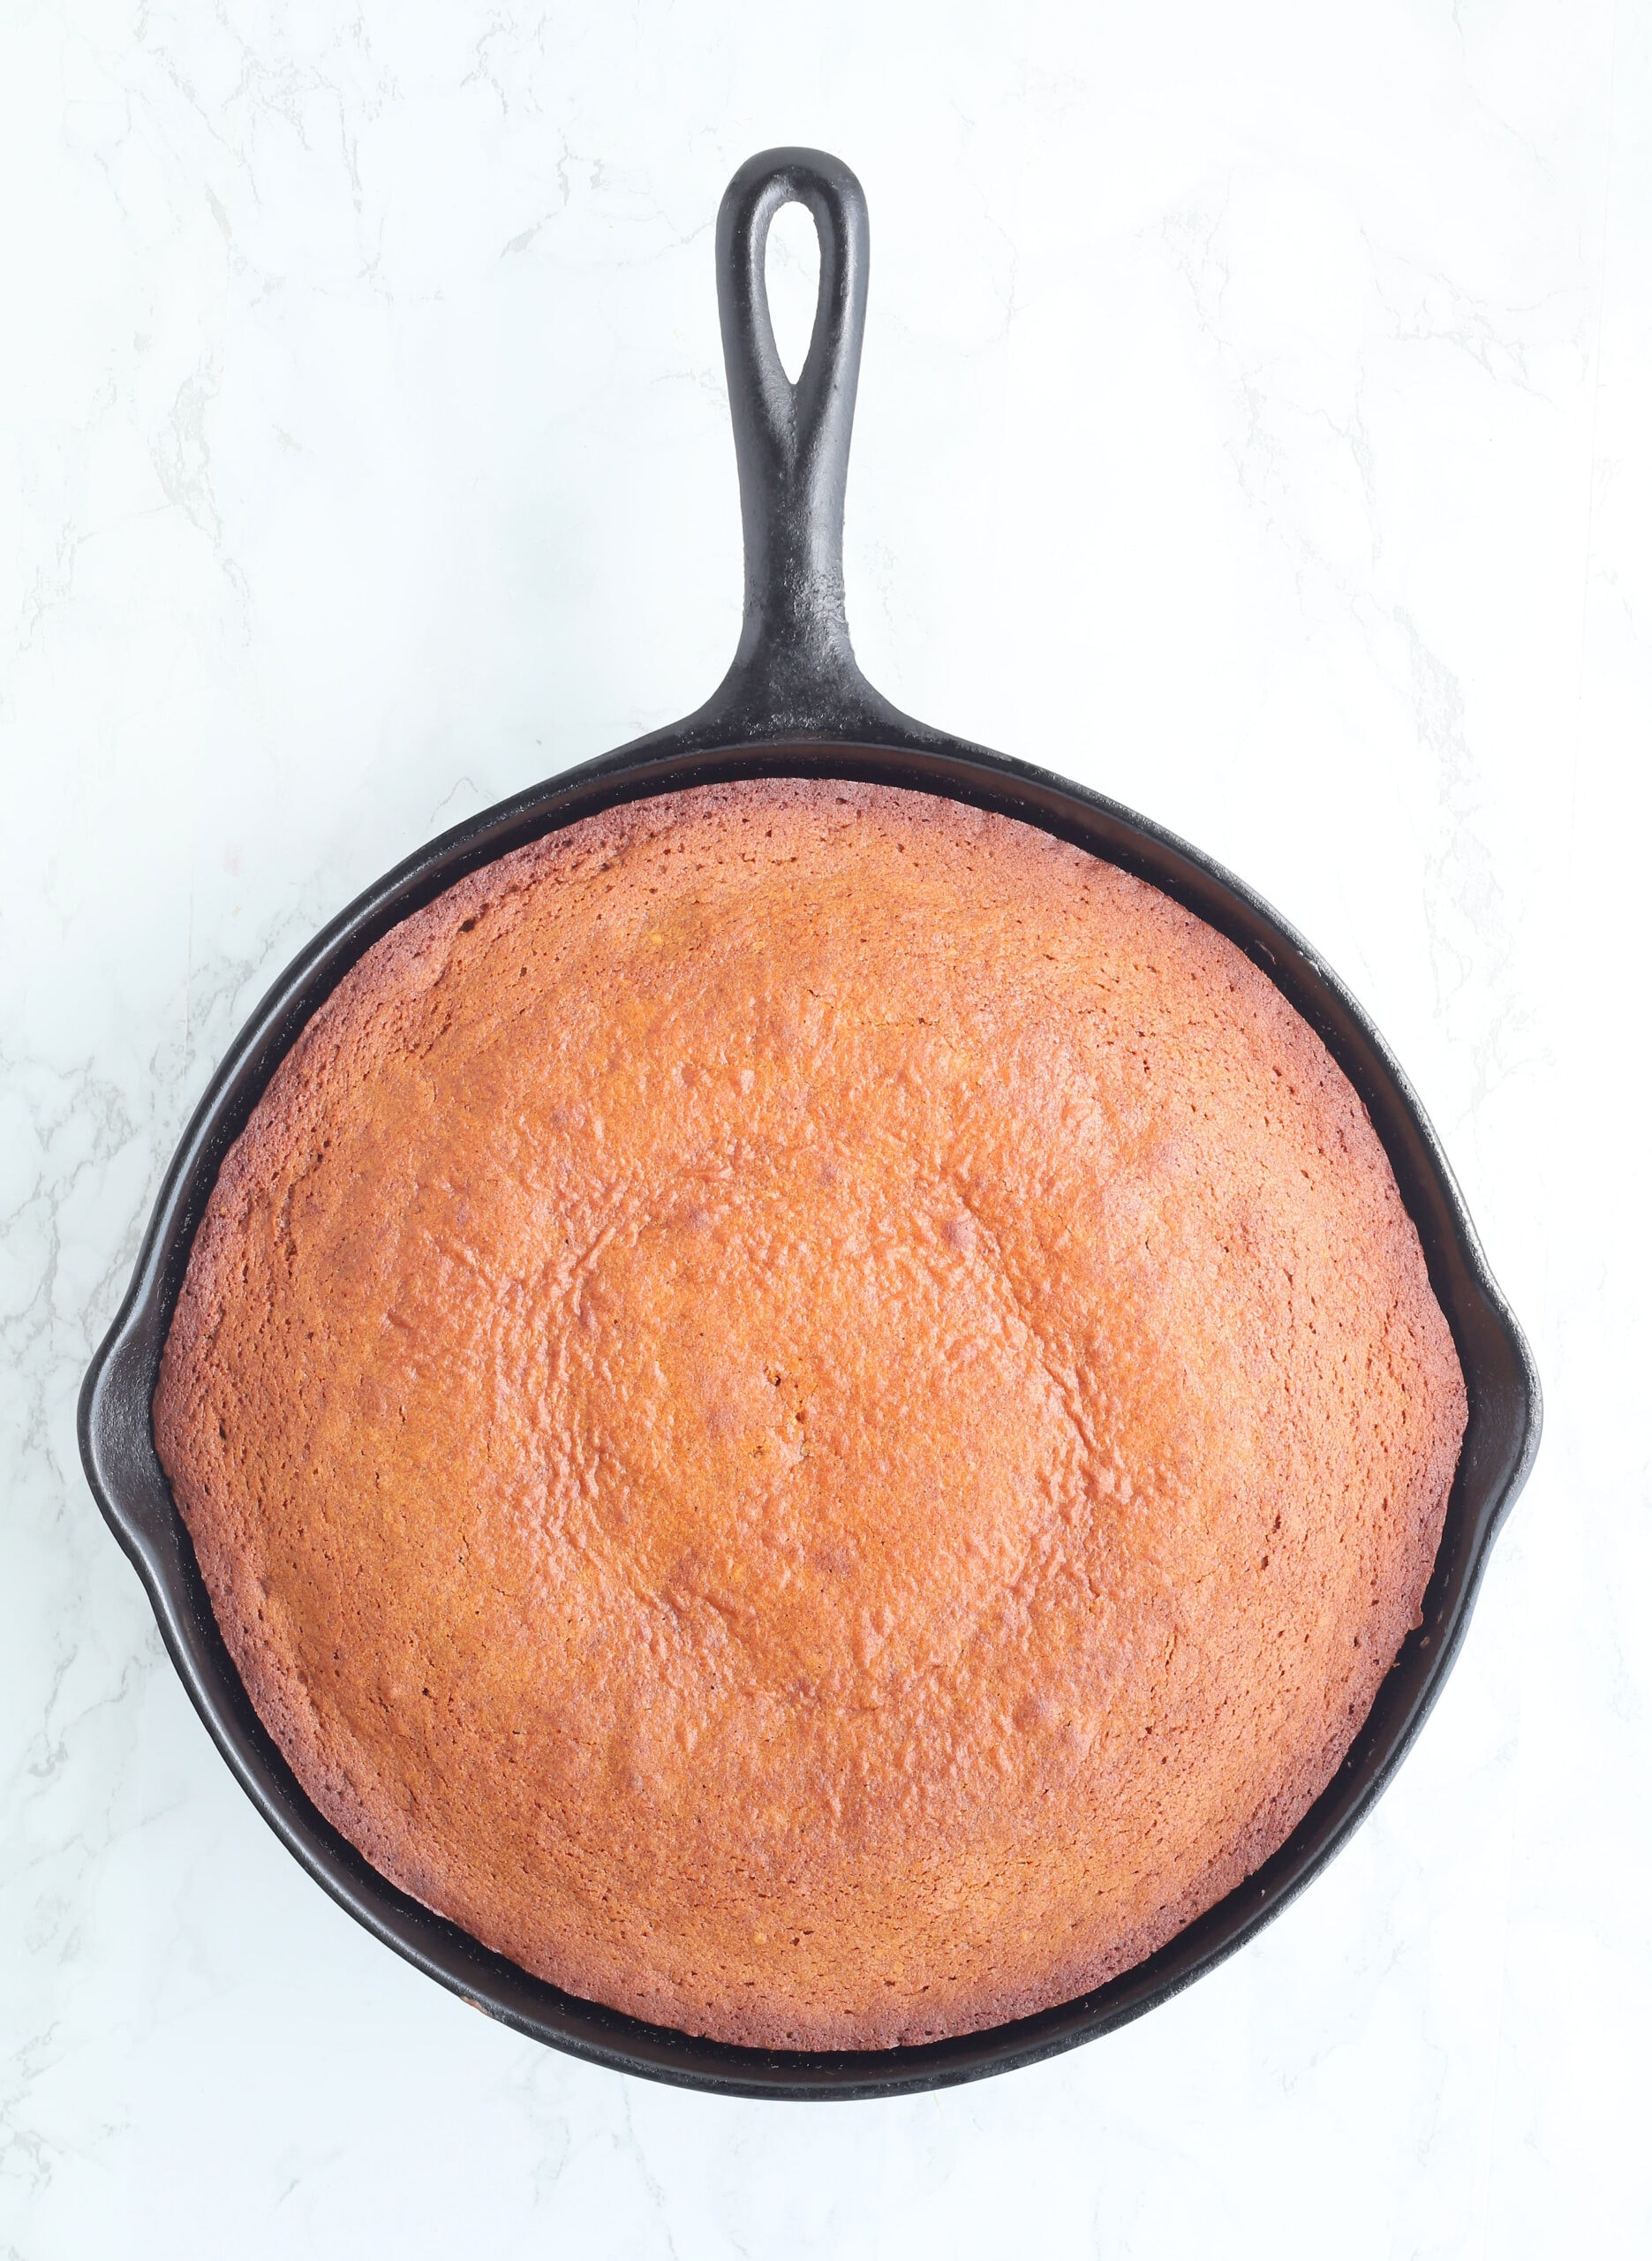 baked honey cake in a cast iron skillet right out of the oven